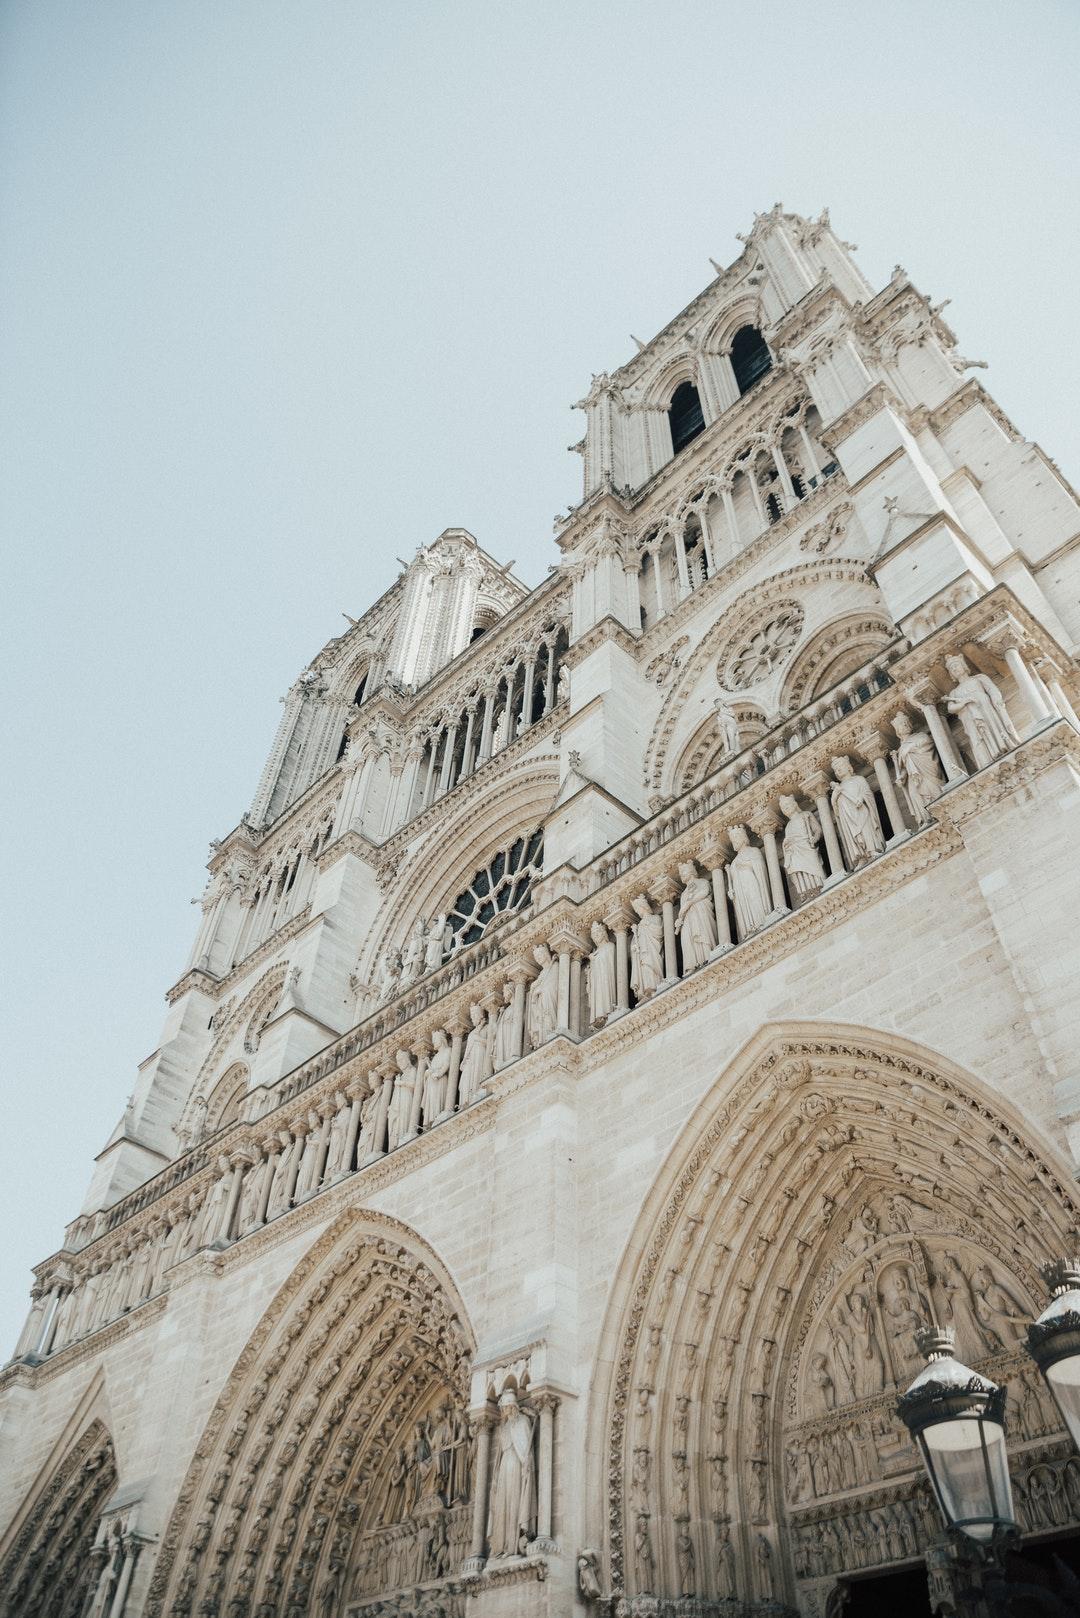 The Gothic Architecture And Facade Of Notre Dame Cathedral In Paris